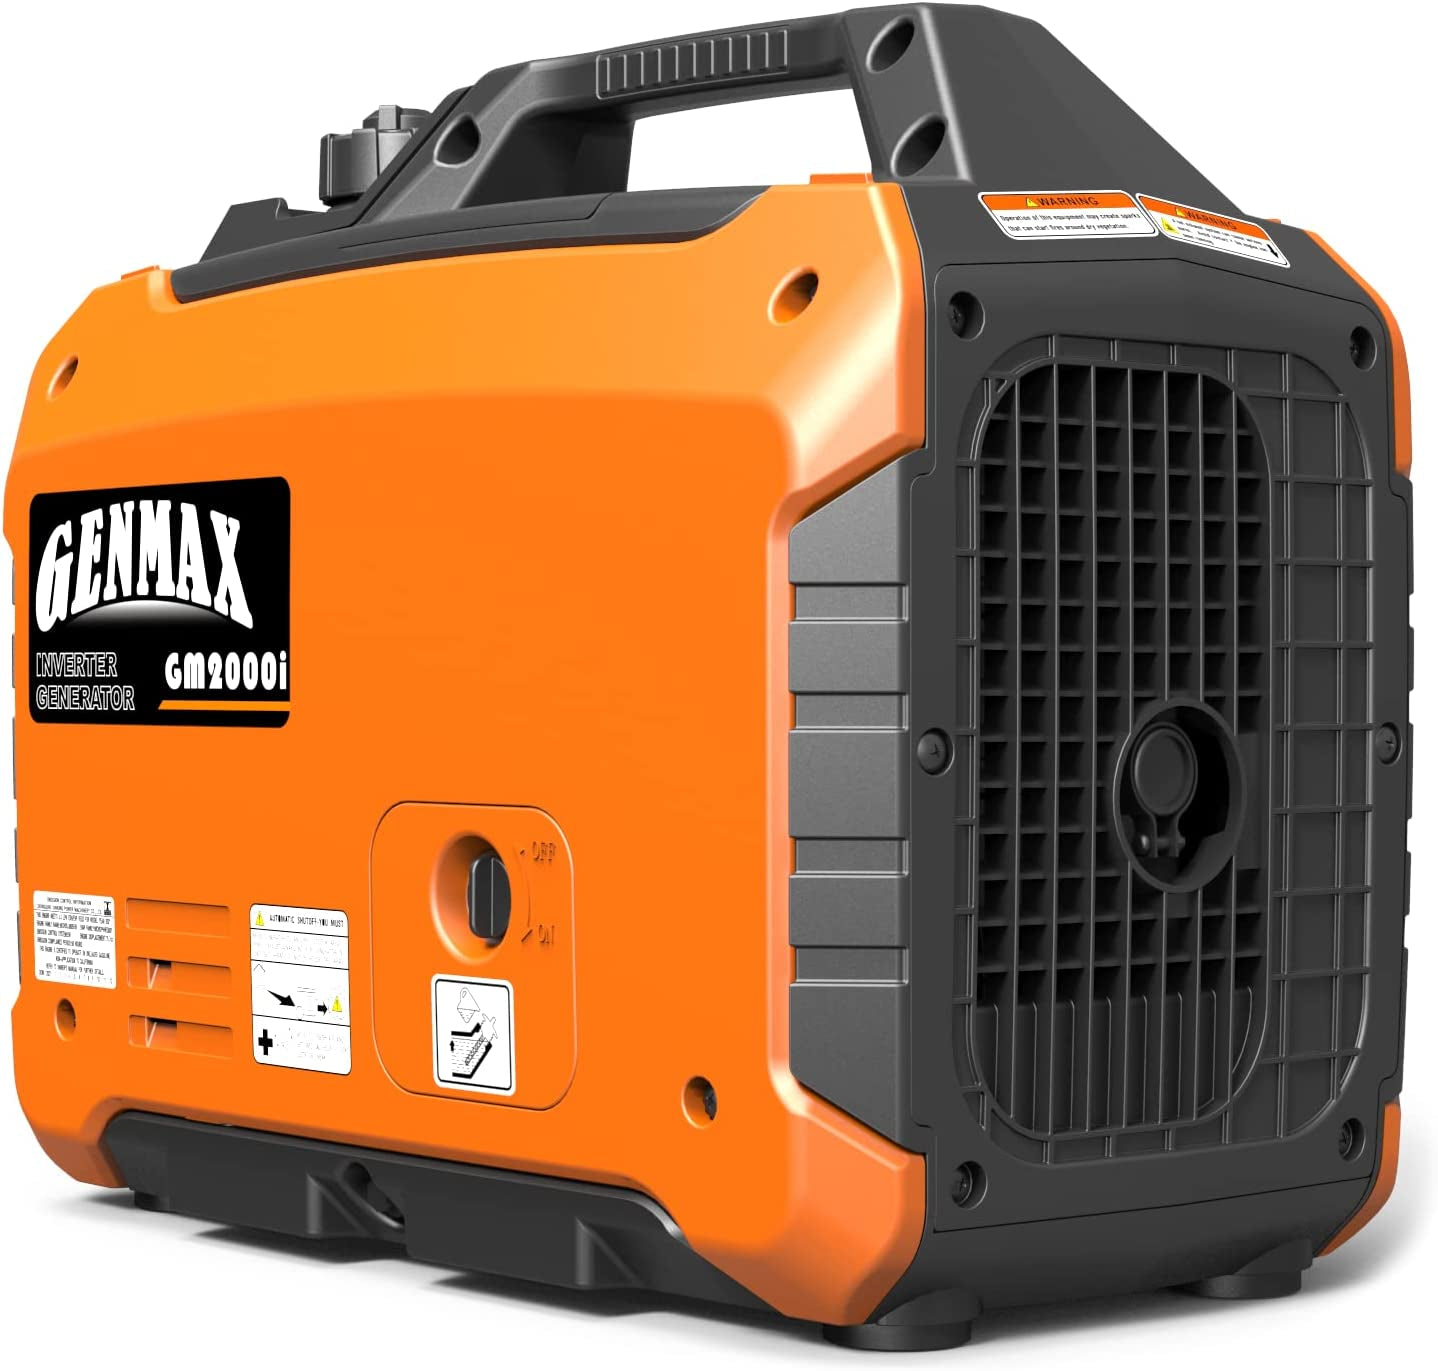 Portable Inverter Generator, 2000W Ultra Quiet Gas Engine, EPA Compliant, Eco Mode Function, Ultra Light, Suitable for Backup Home and Camping(Gm2000I)